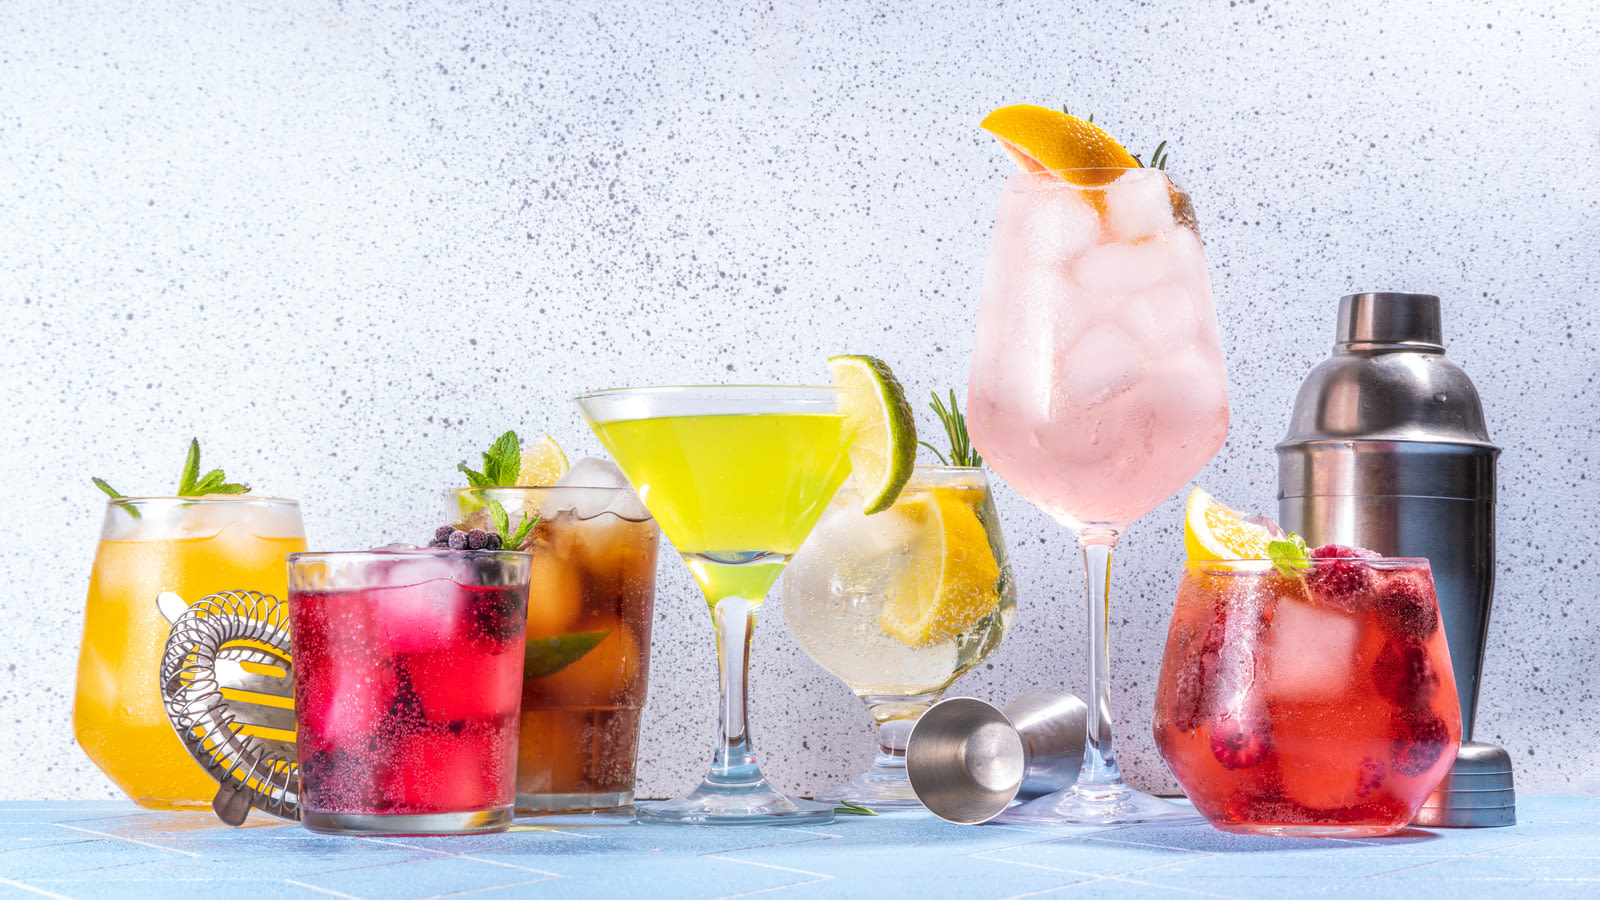 What Exactly Is A Mocktail Drink (And Where Did The Trend Originate)?